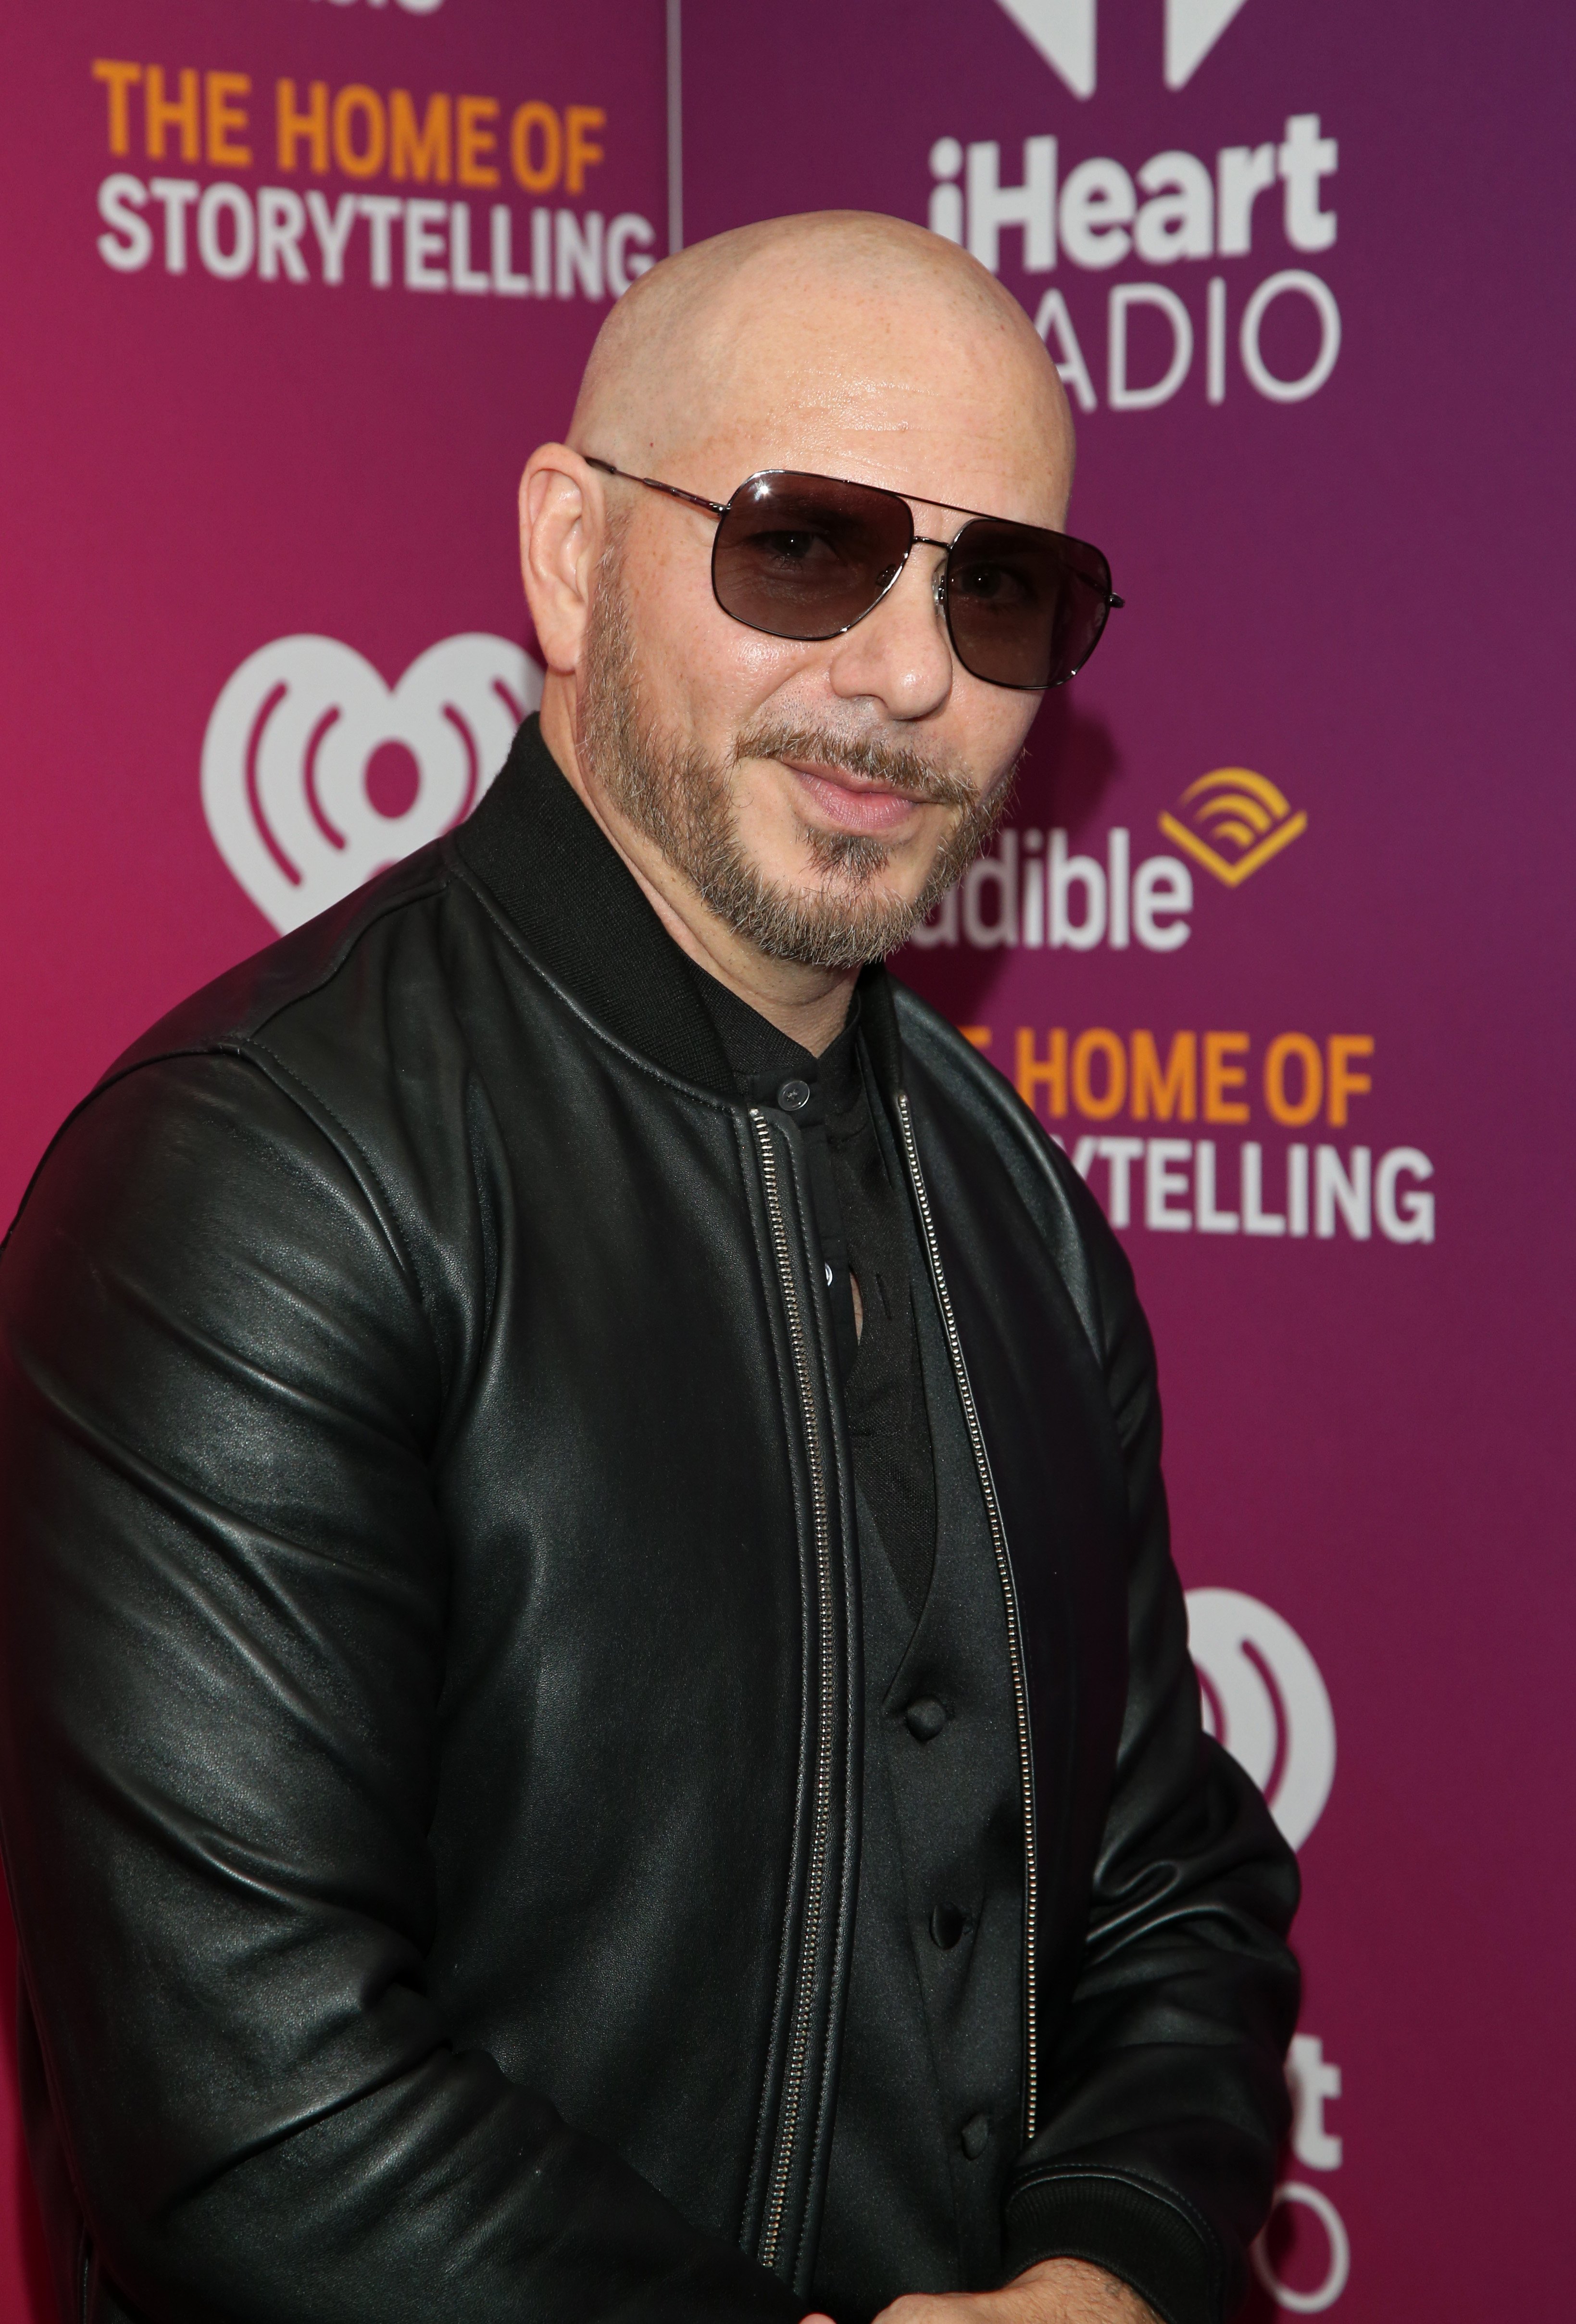  Pitbull at the iHeartRadio Music Festival on September 23, 2022, in Las Vegas | Source: Getty Images